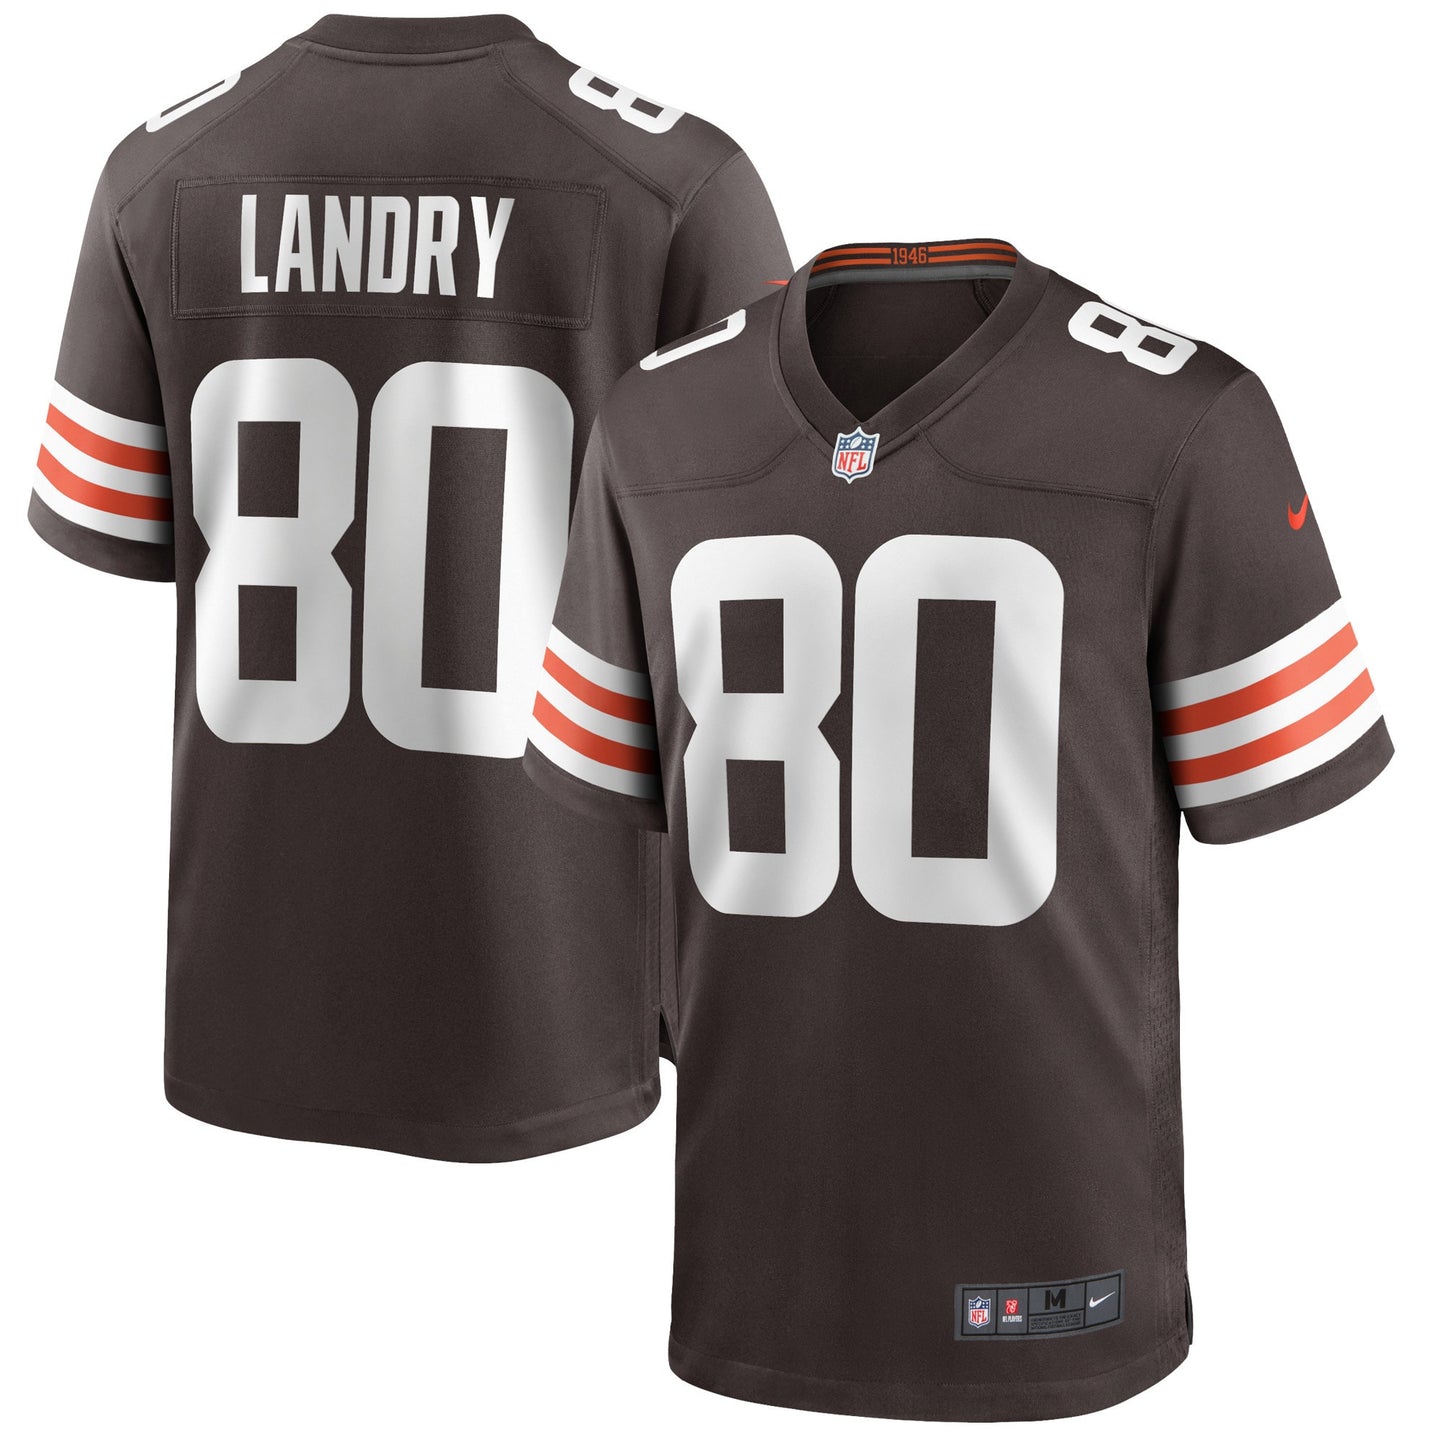 Jarvis Landry Cleveland Browns Nike Game Player Jersey - Brown